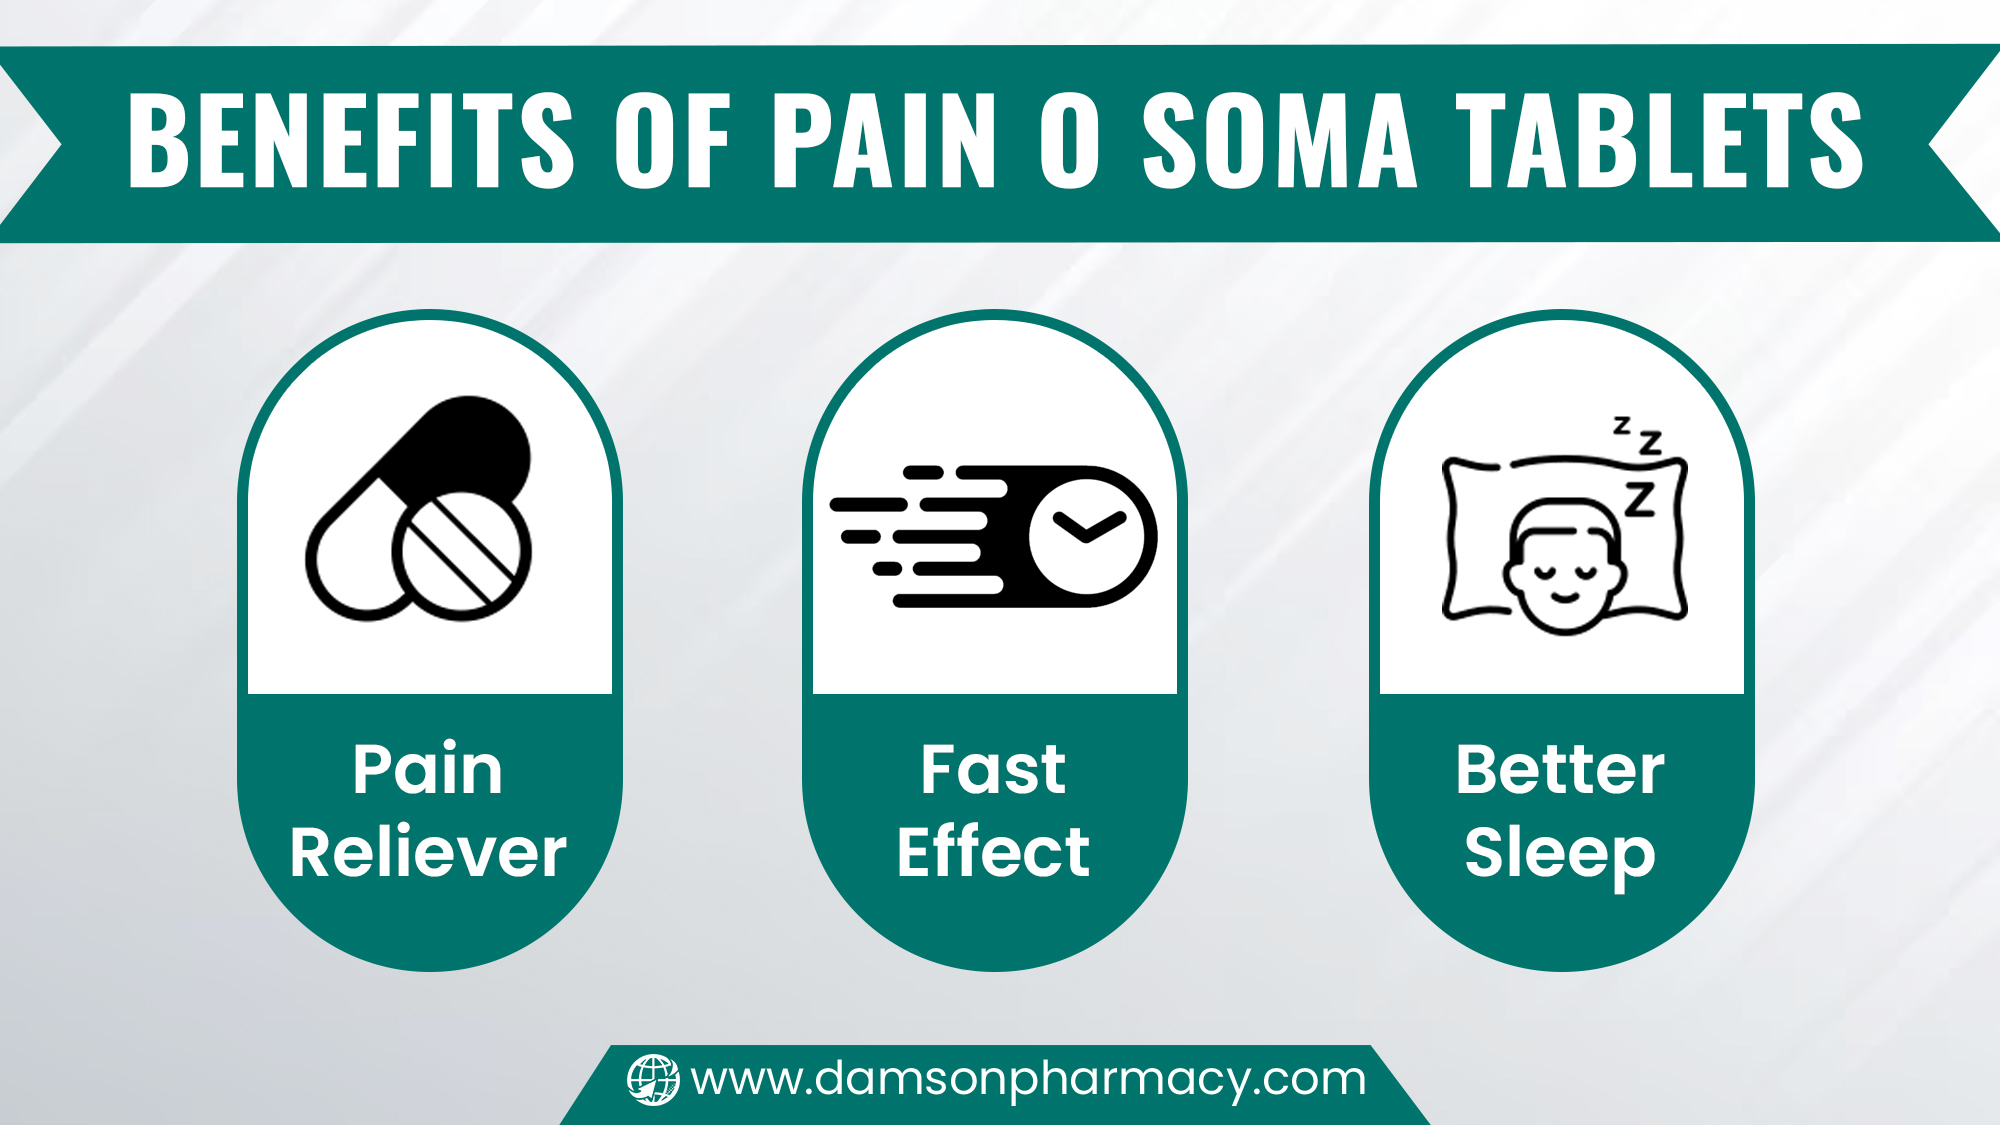 Benefits of Pain O Soma Tablets